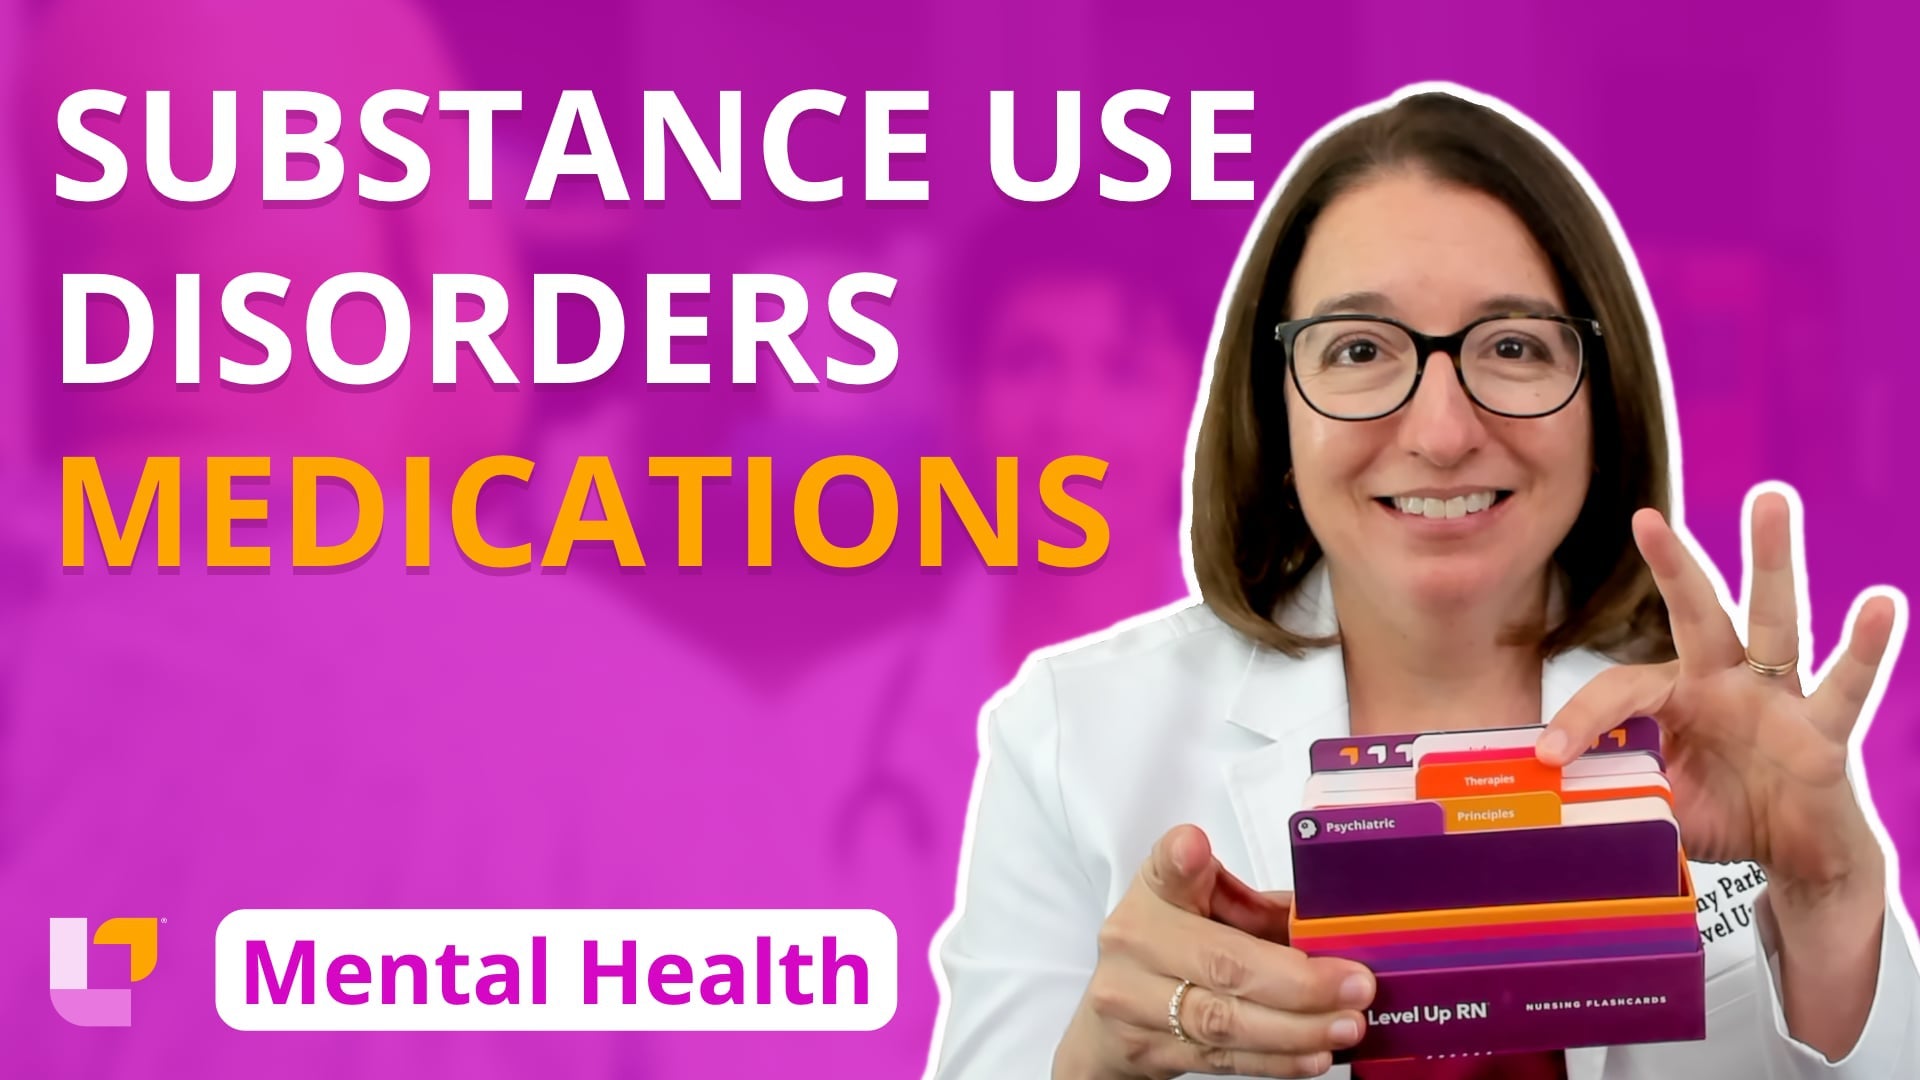 Psychiatric Mental Health, part 25: Therapies - Medications for Substance Use Disorders - LevelUpRN